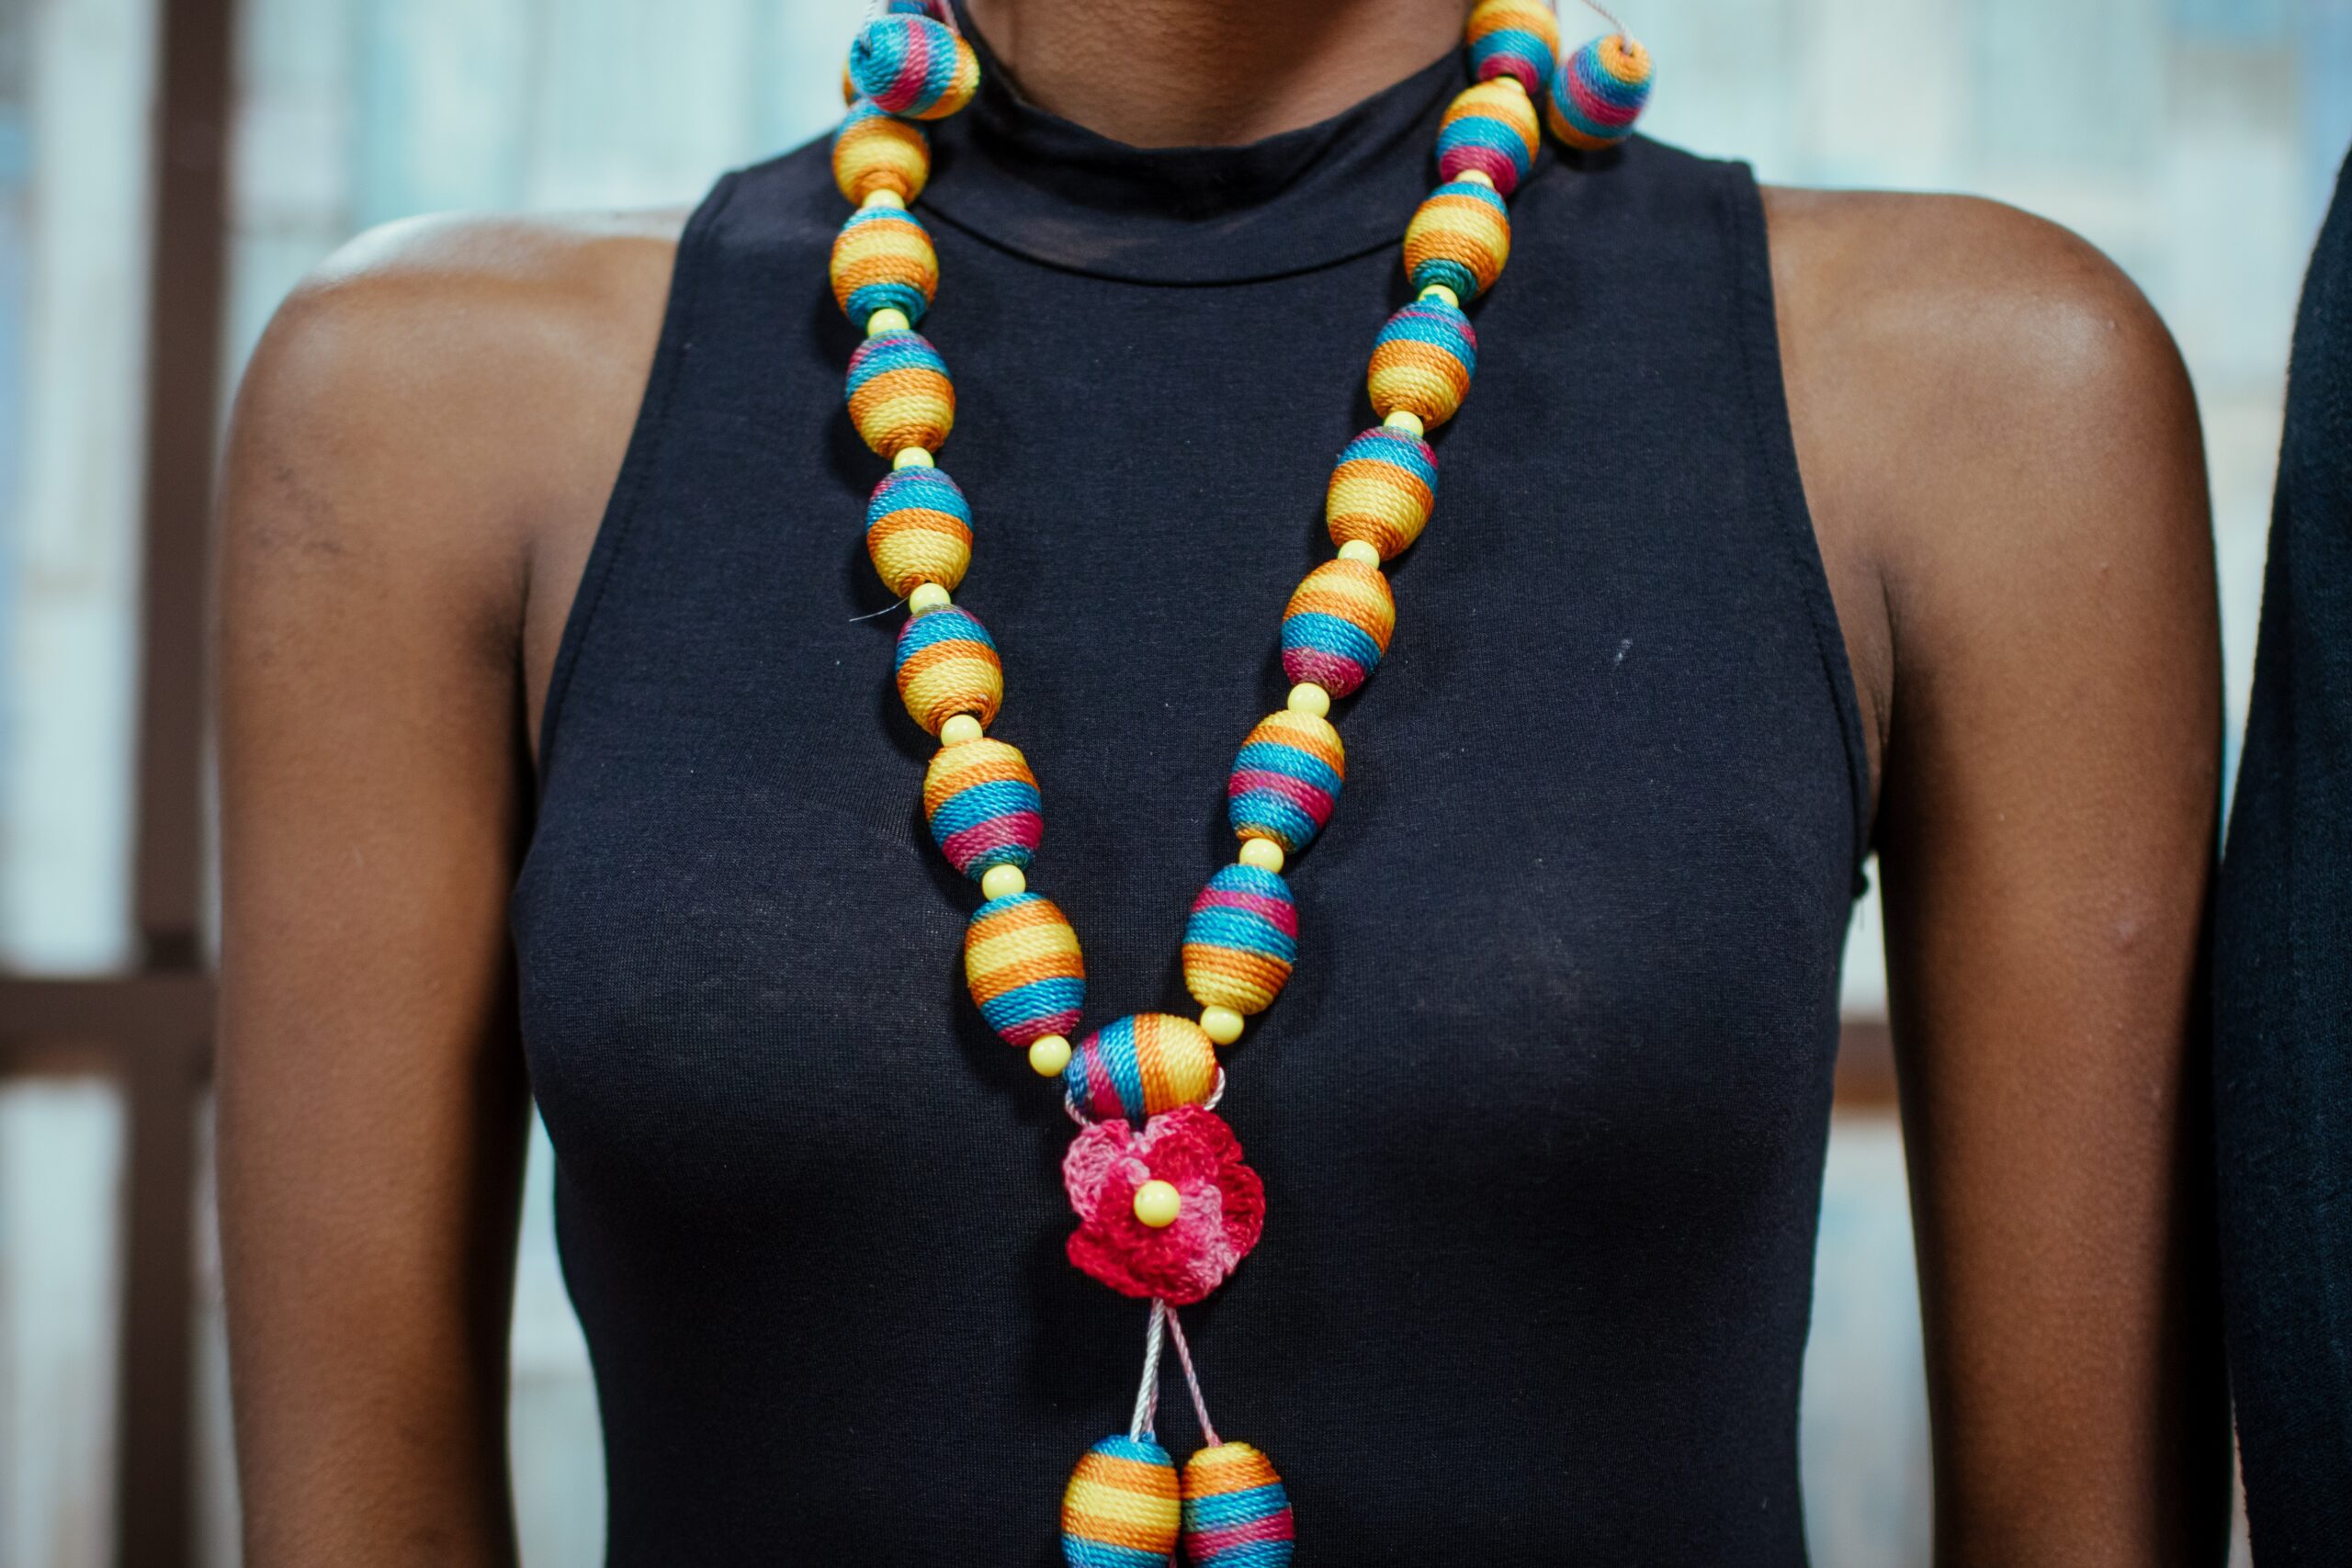 Woman wearing a necklace